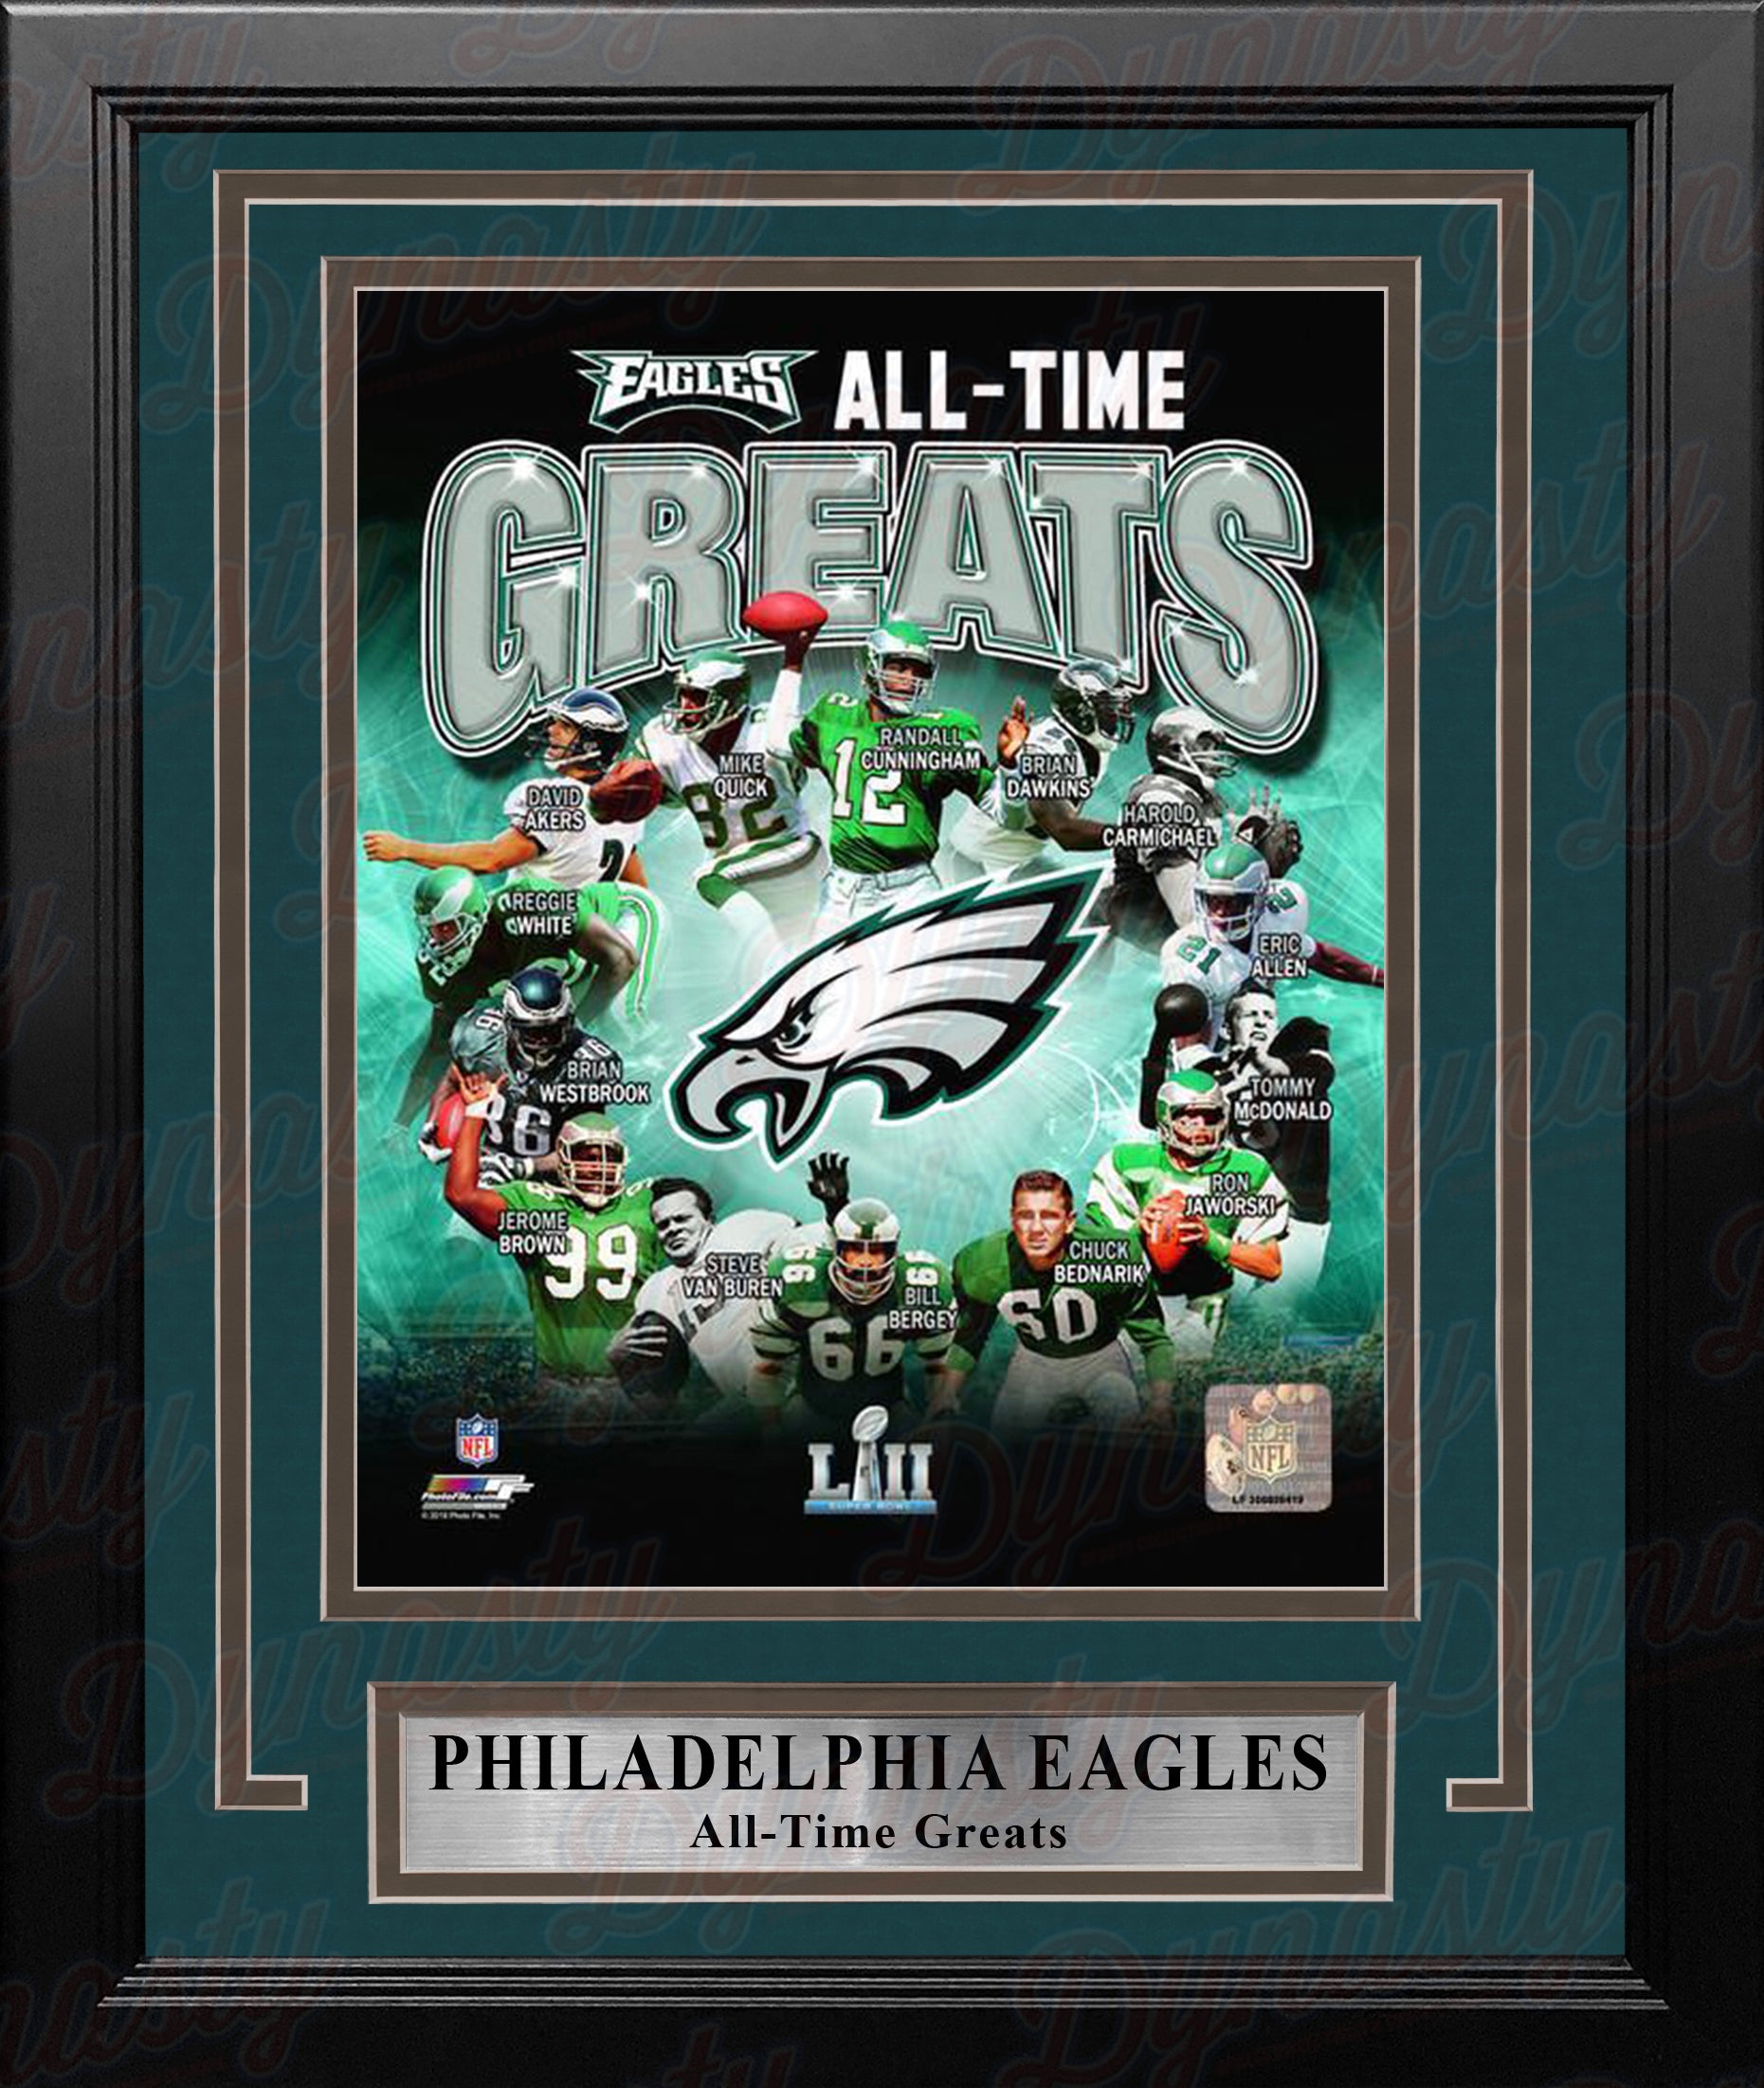 Philadelphia Eagles All-Time Greats NFL Football 8" x 10" Framed & Matted Photo - Dynasty Sports & Framing 